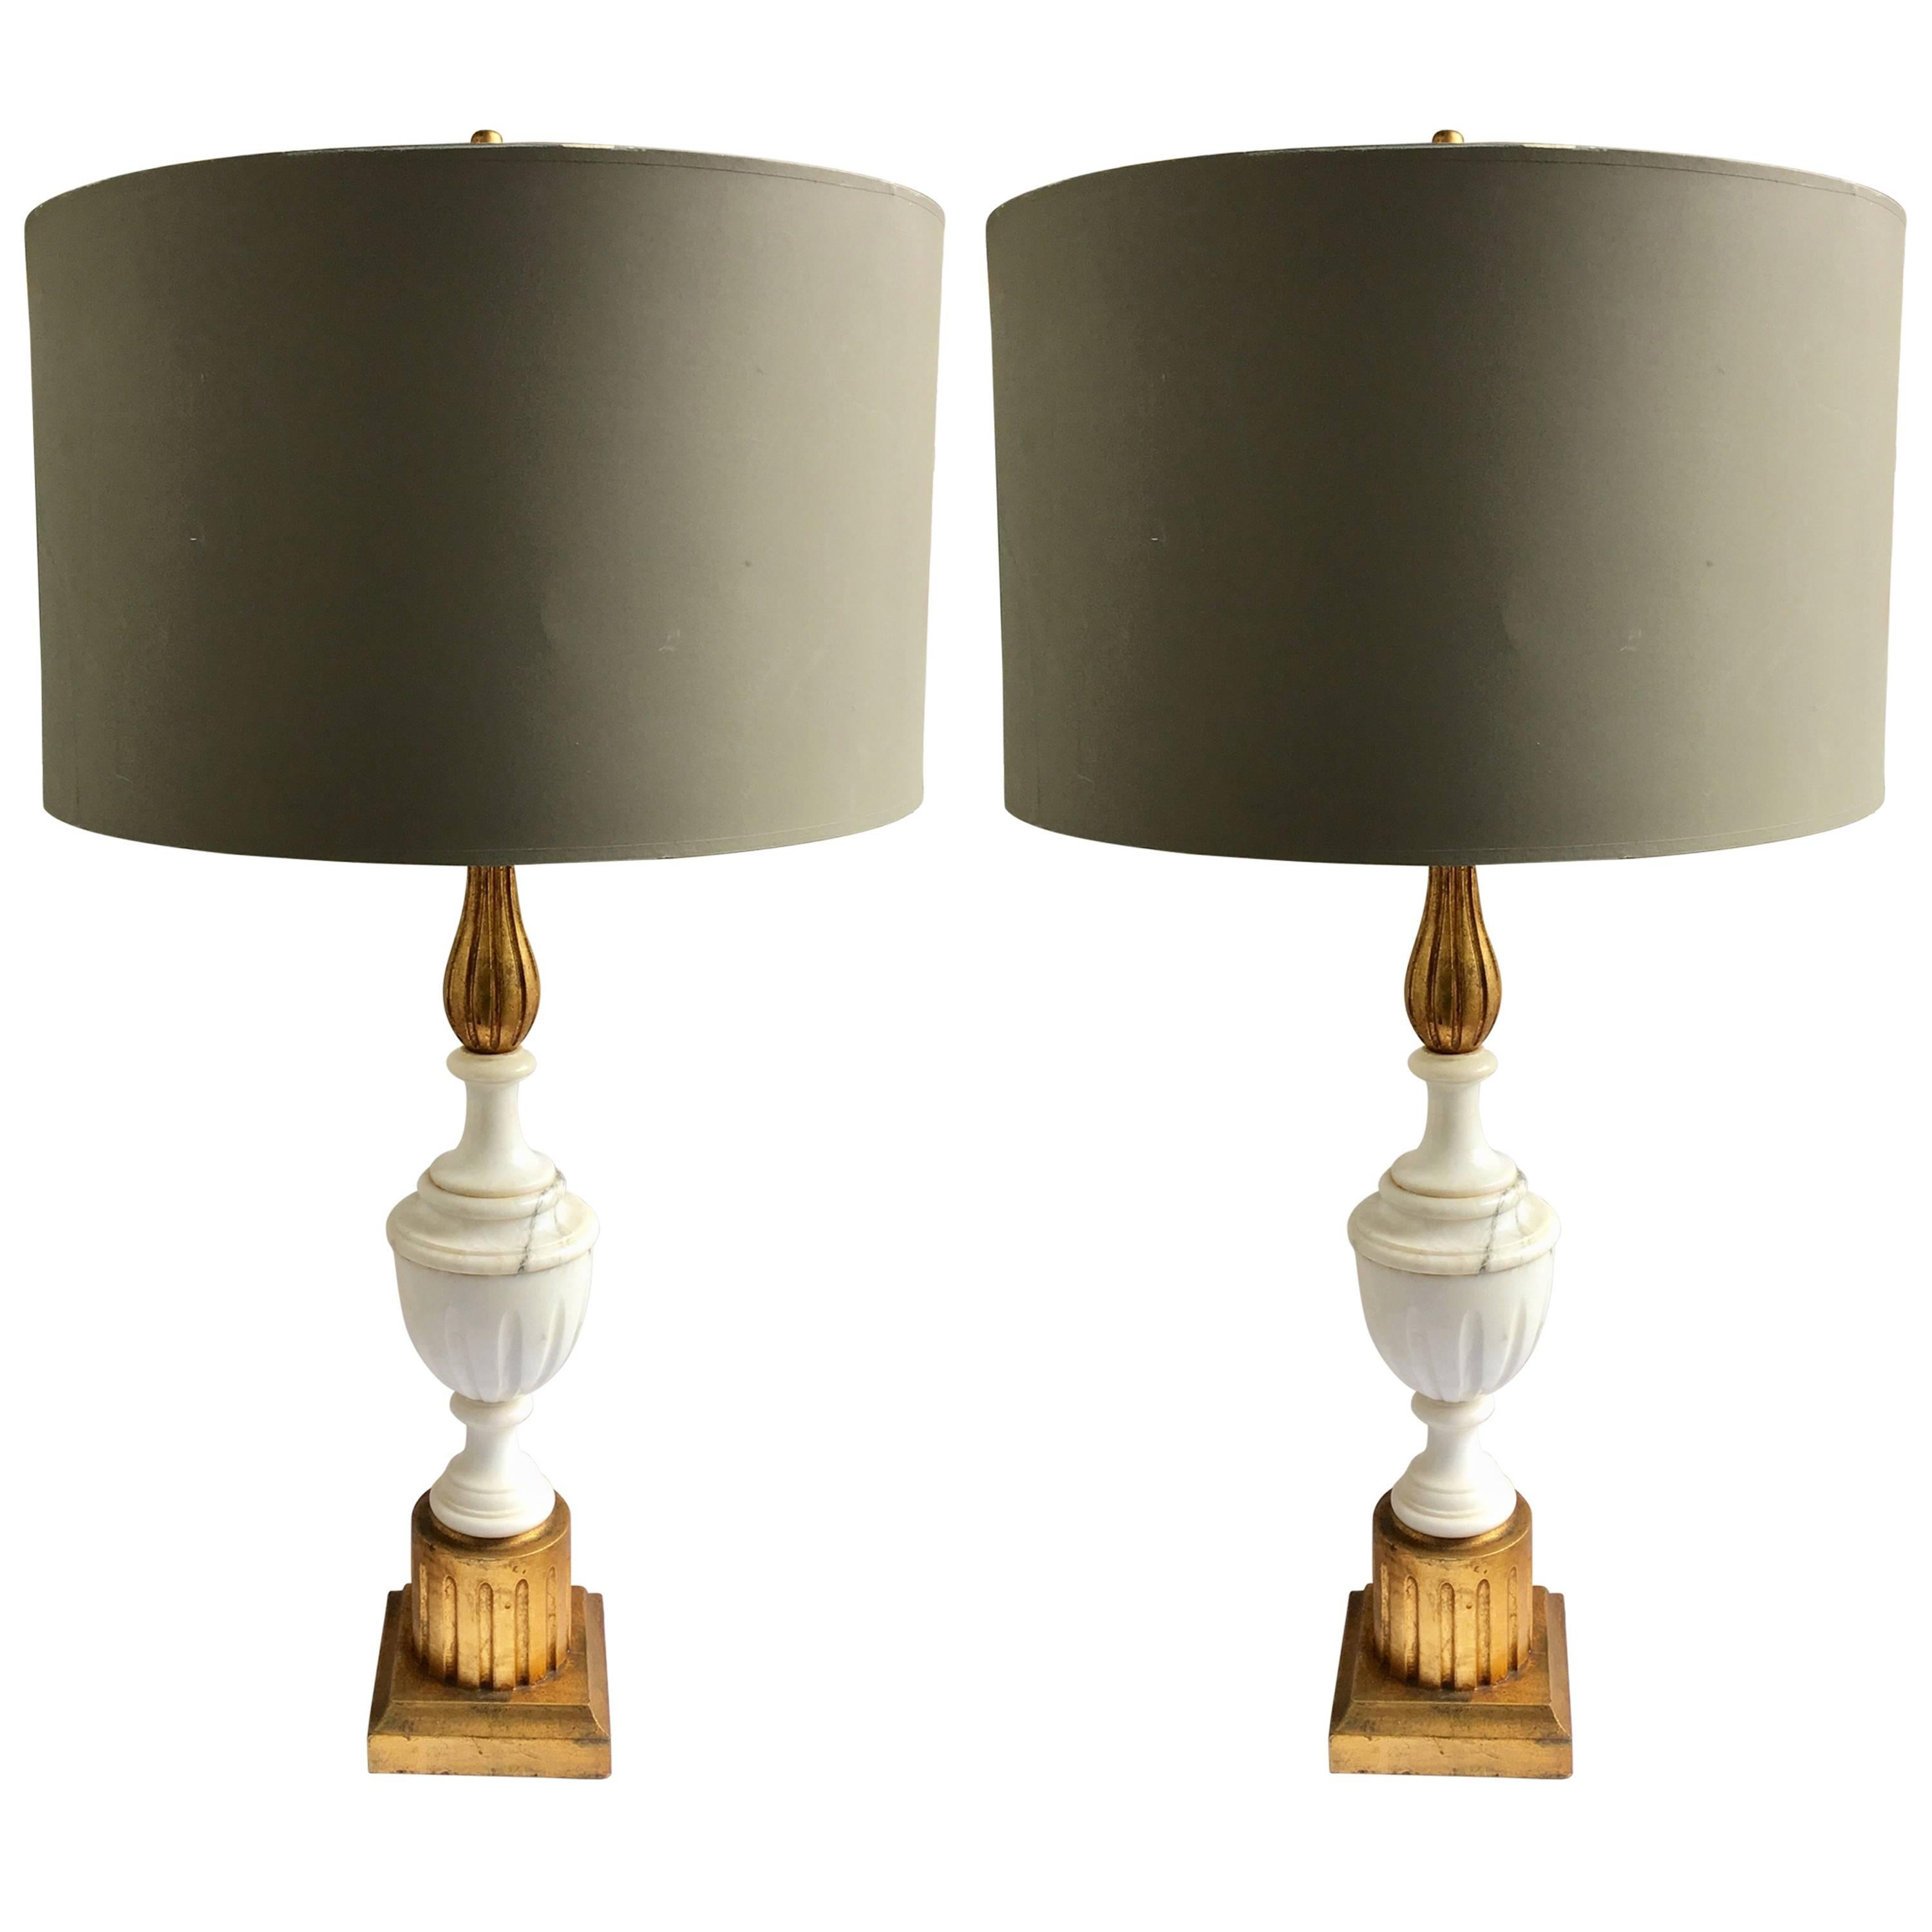 Italian Marble and Giltwood Fluted Column Urn Table Lamps, Pair